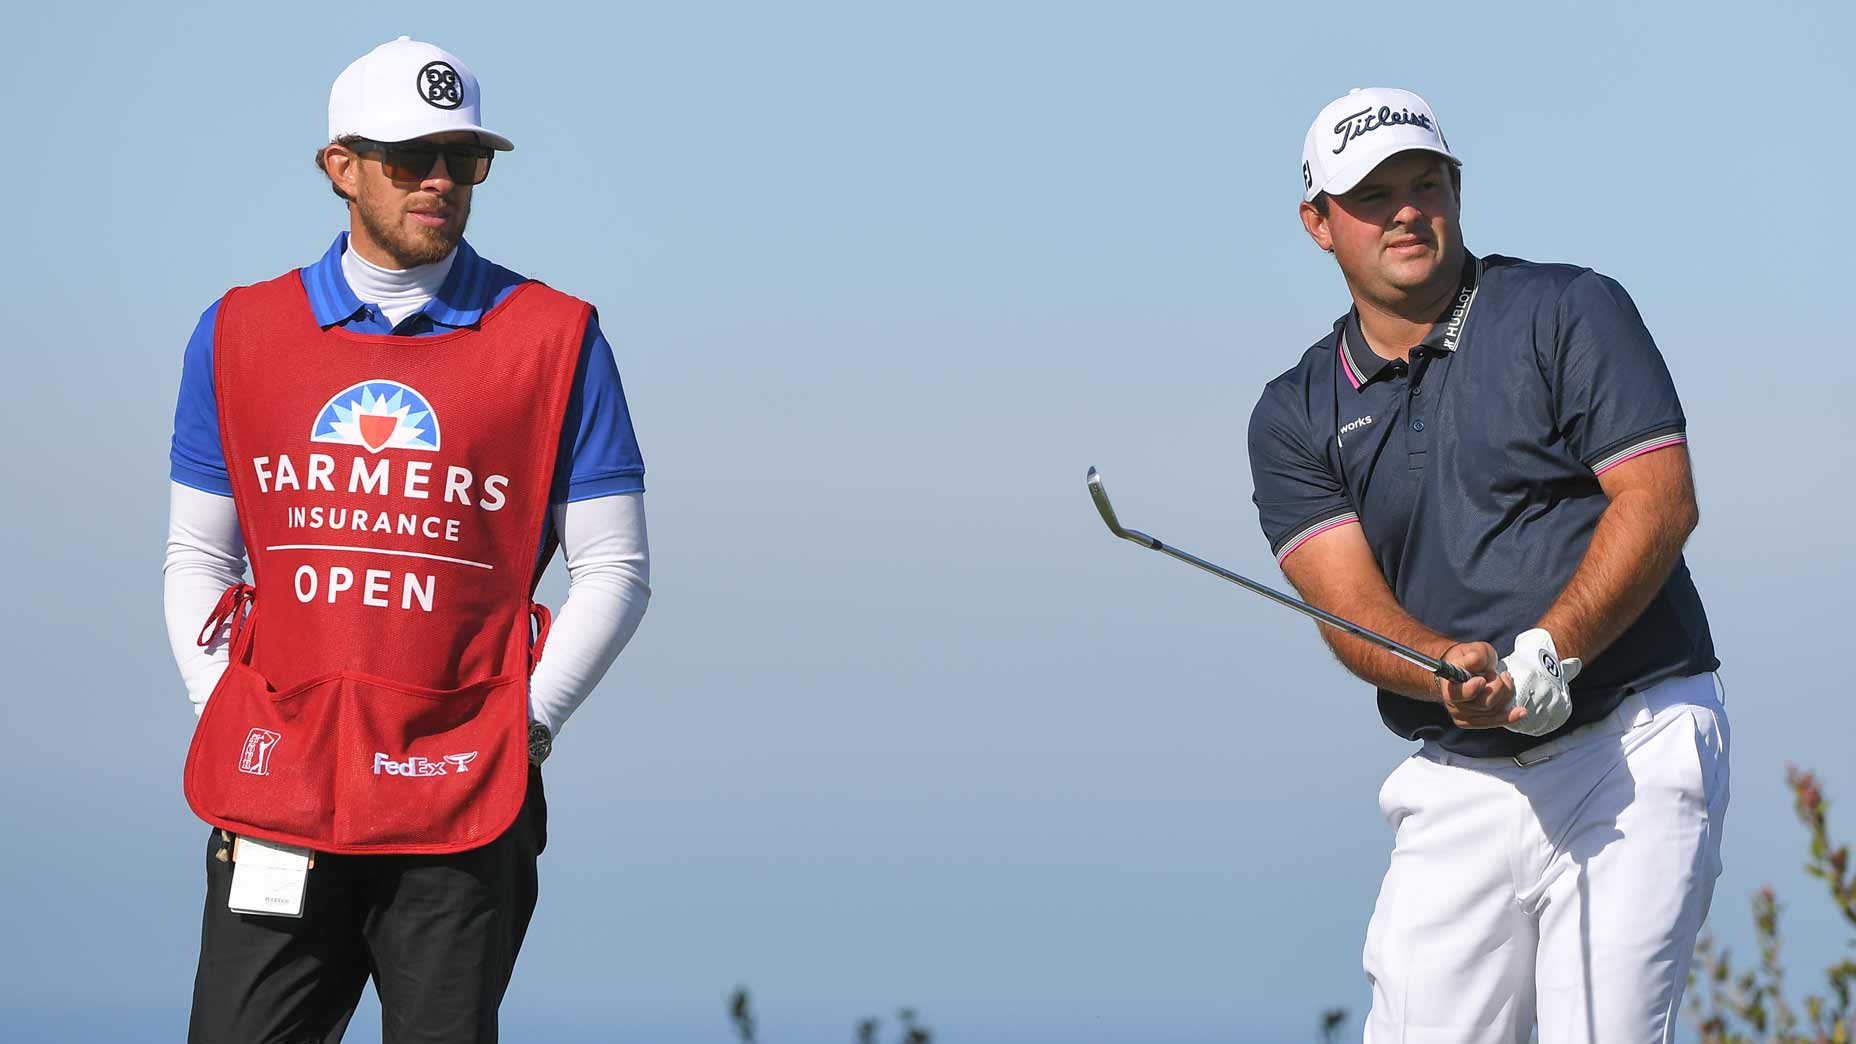 2021 Farmers Insurance Open live coverage How to watch on Friday